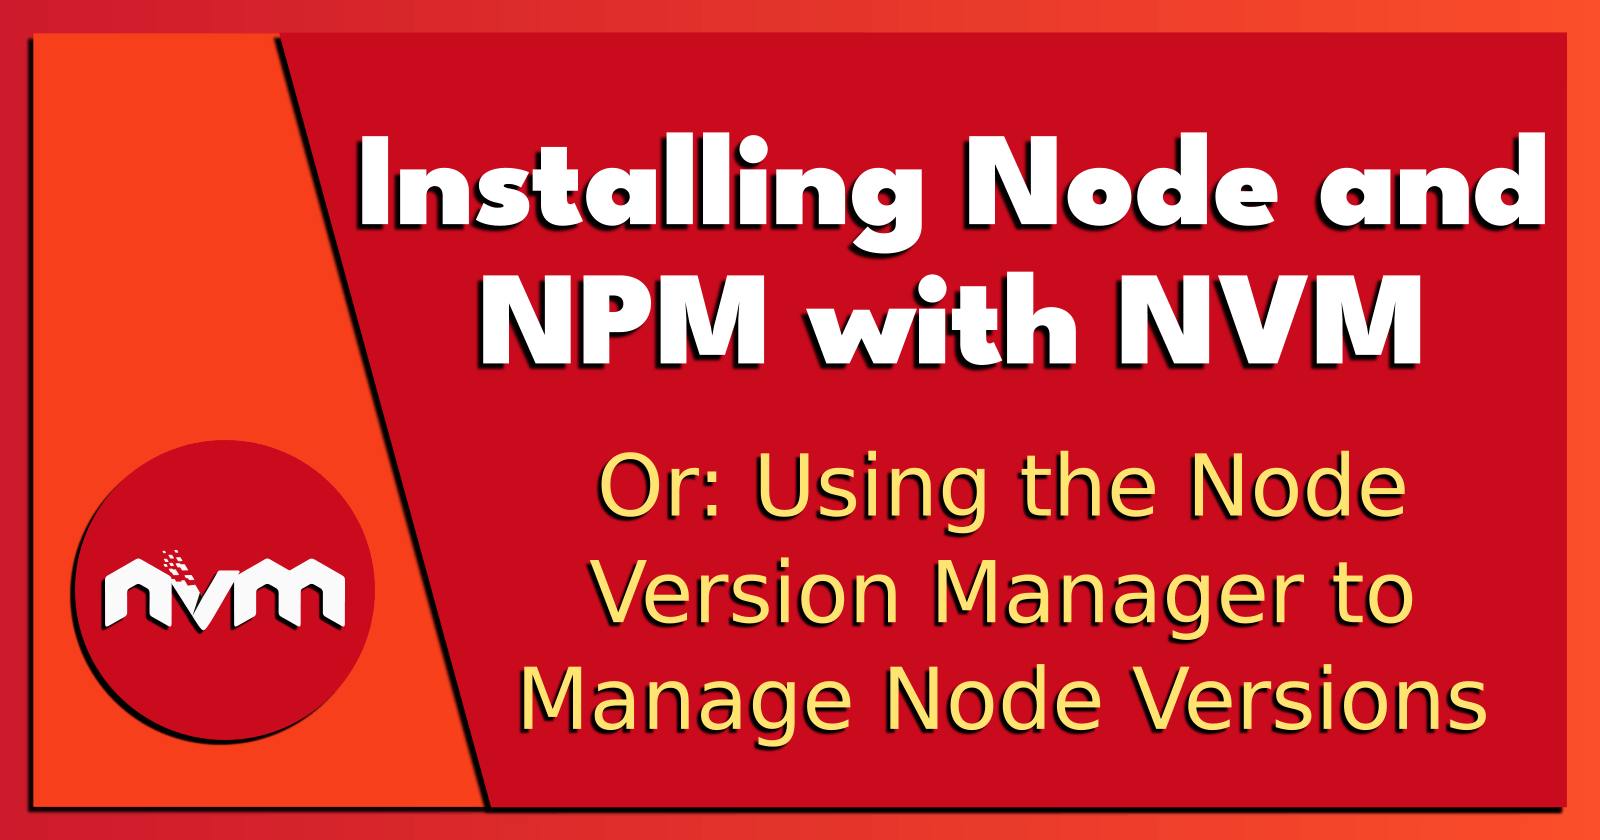 Installing Node and NPM with NVM.